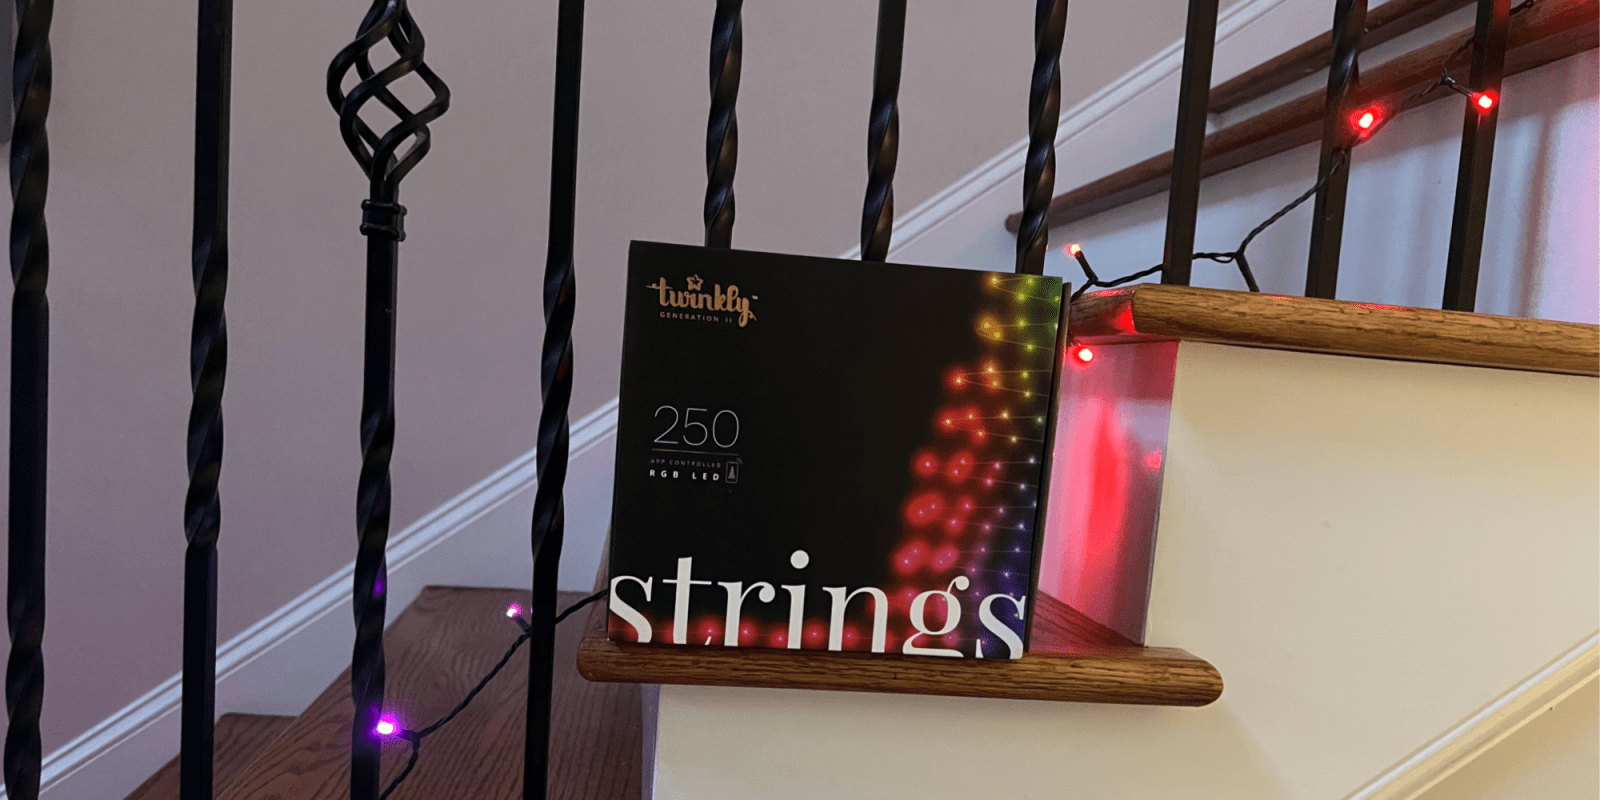 photo of HomeKit Weekly: With HomeKit support, Twinkly lights are now useful year-round for lighting effects based on Apple Music… image